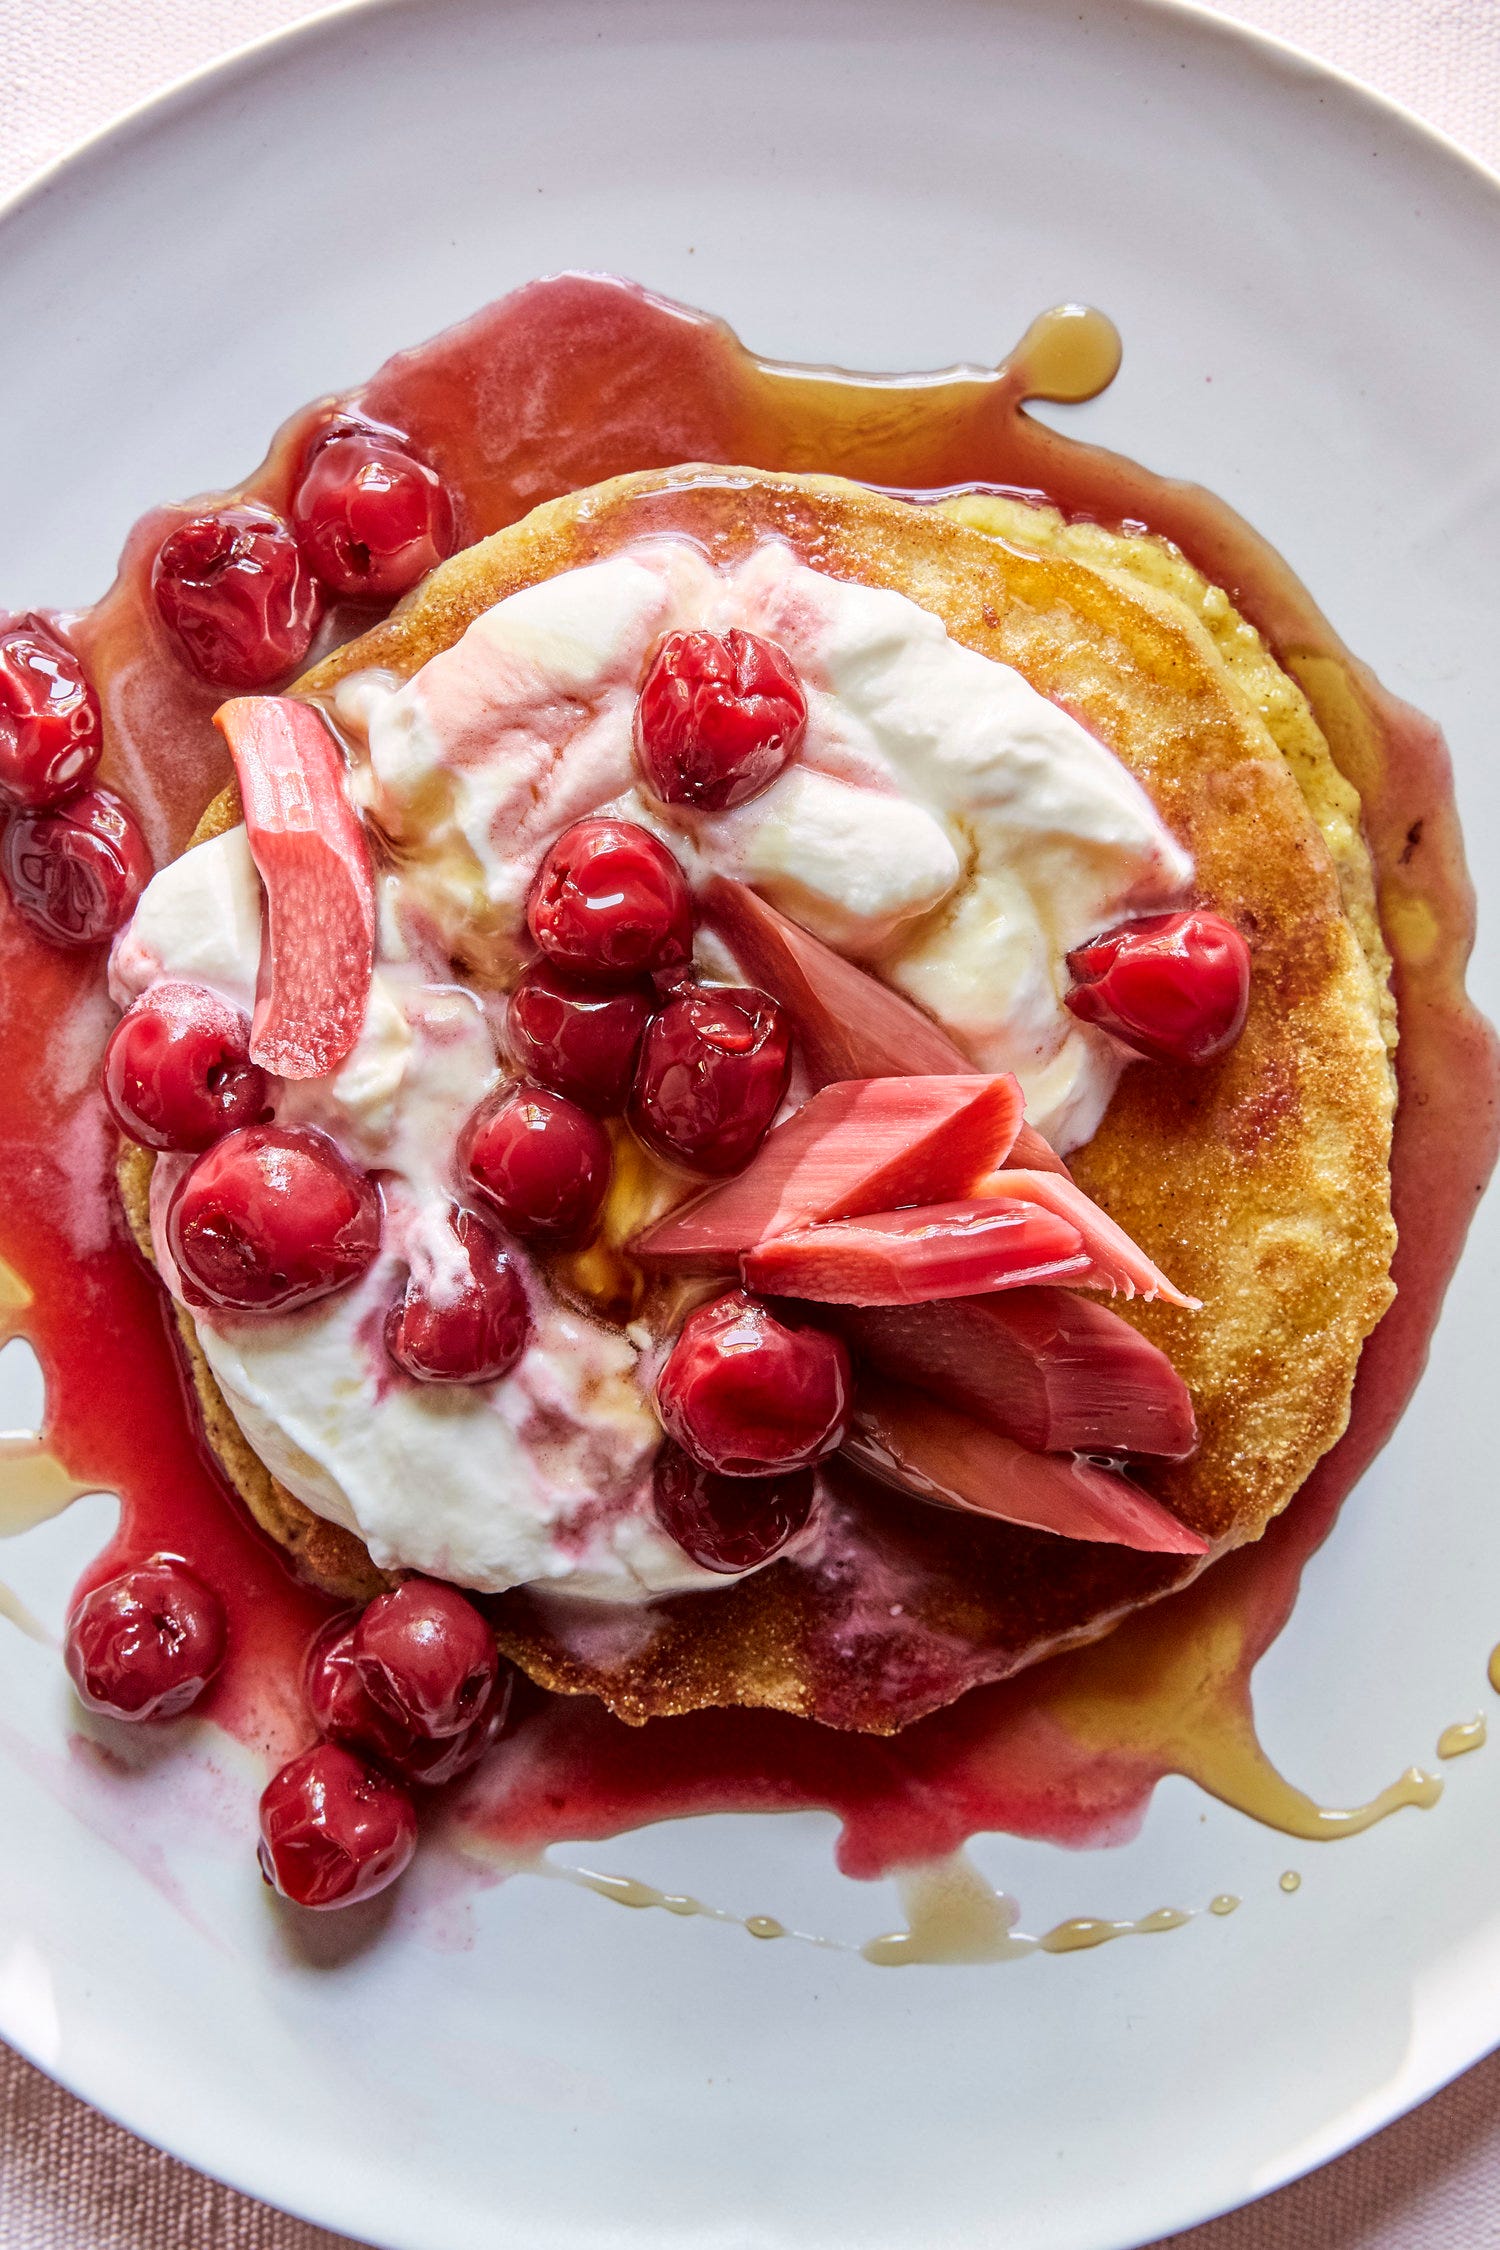 Johnny Cakes with Rhubarb and Sour Cherries